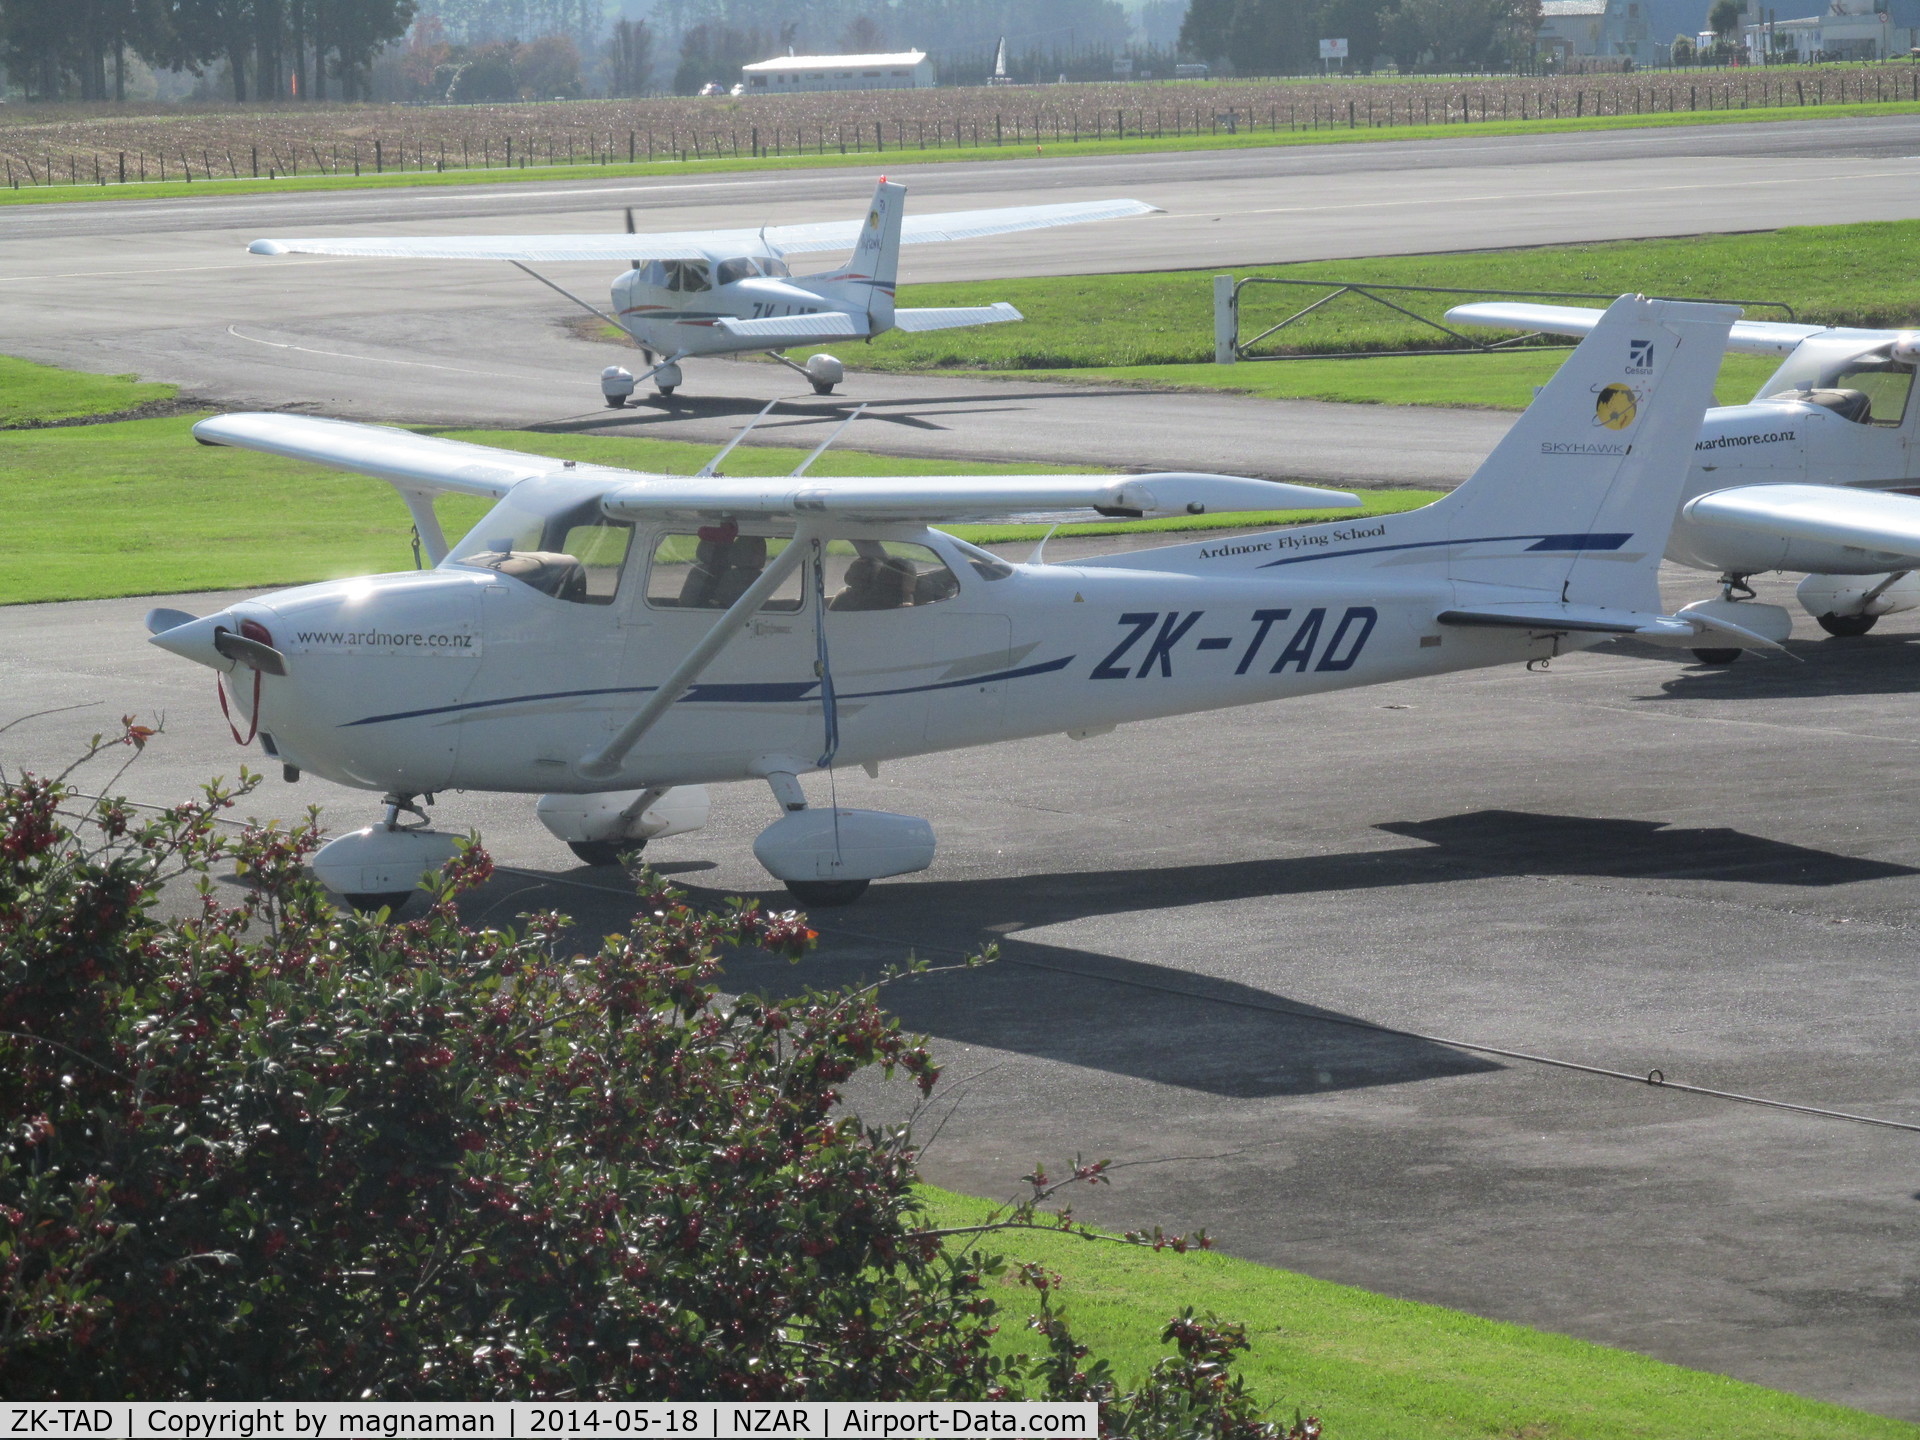 ZK-TAD, 2007 Cessna 172R C/N 17281456, Not a GA7 but another Ardmore based Cessna 172 c/n 81456